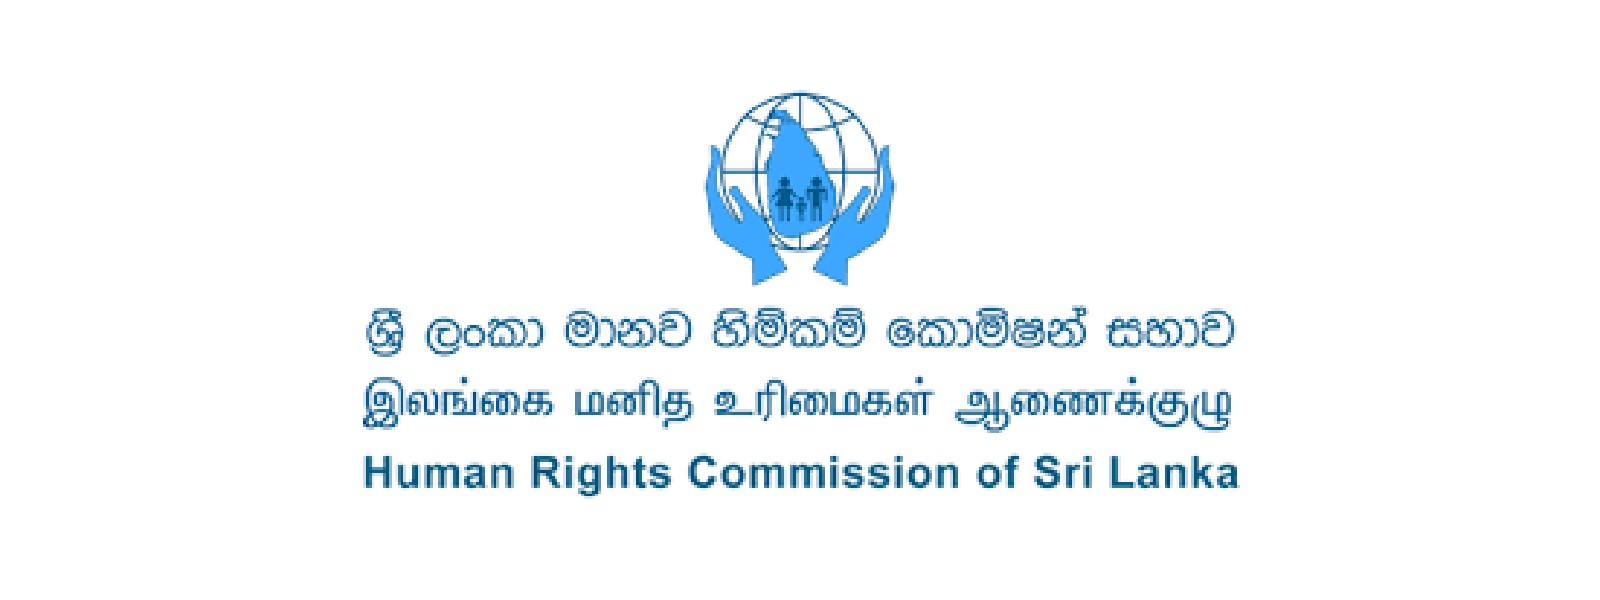 HRCSL requests MoD to provide statement regarding State of Emergency